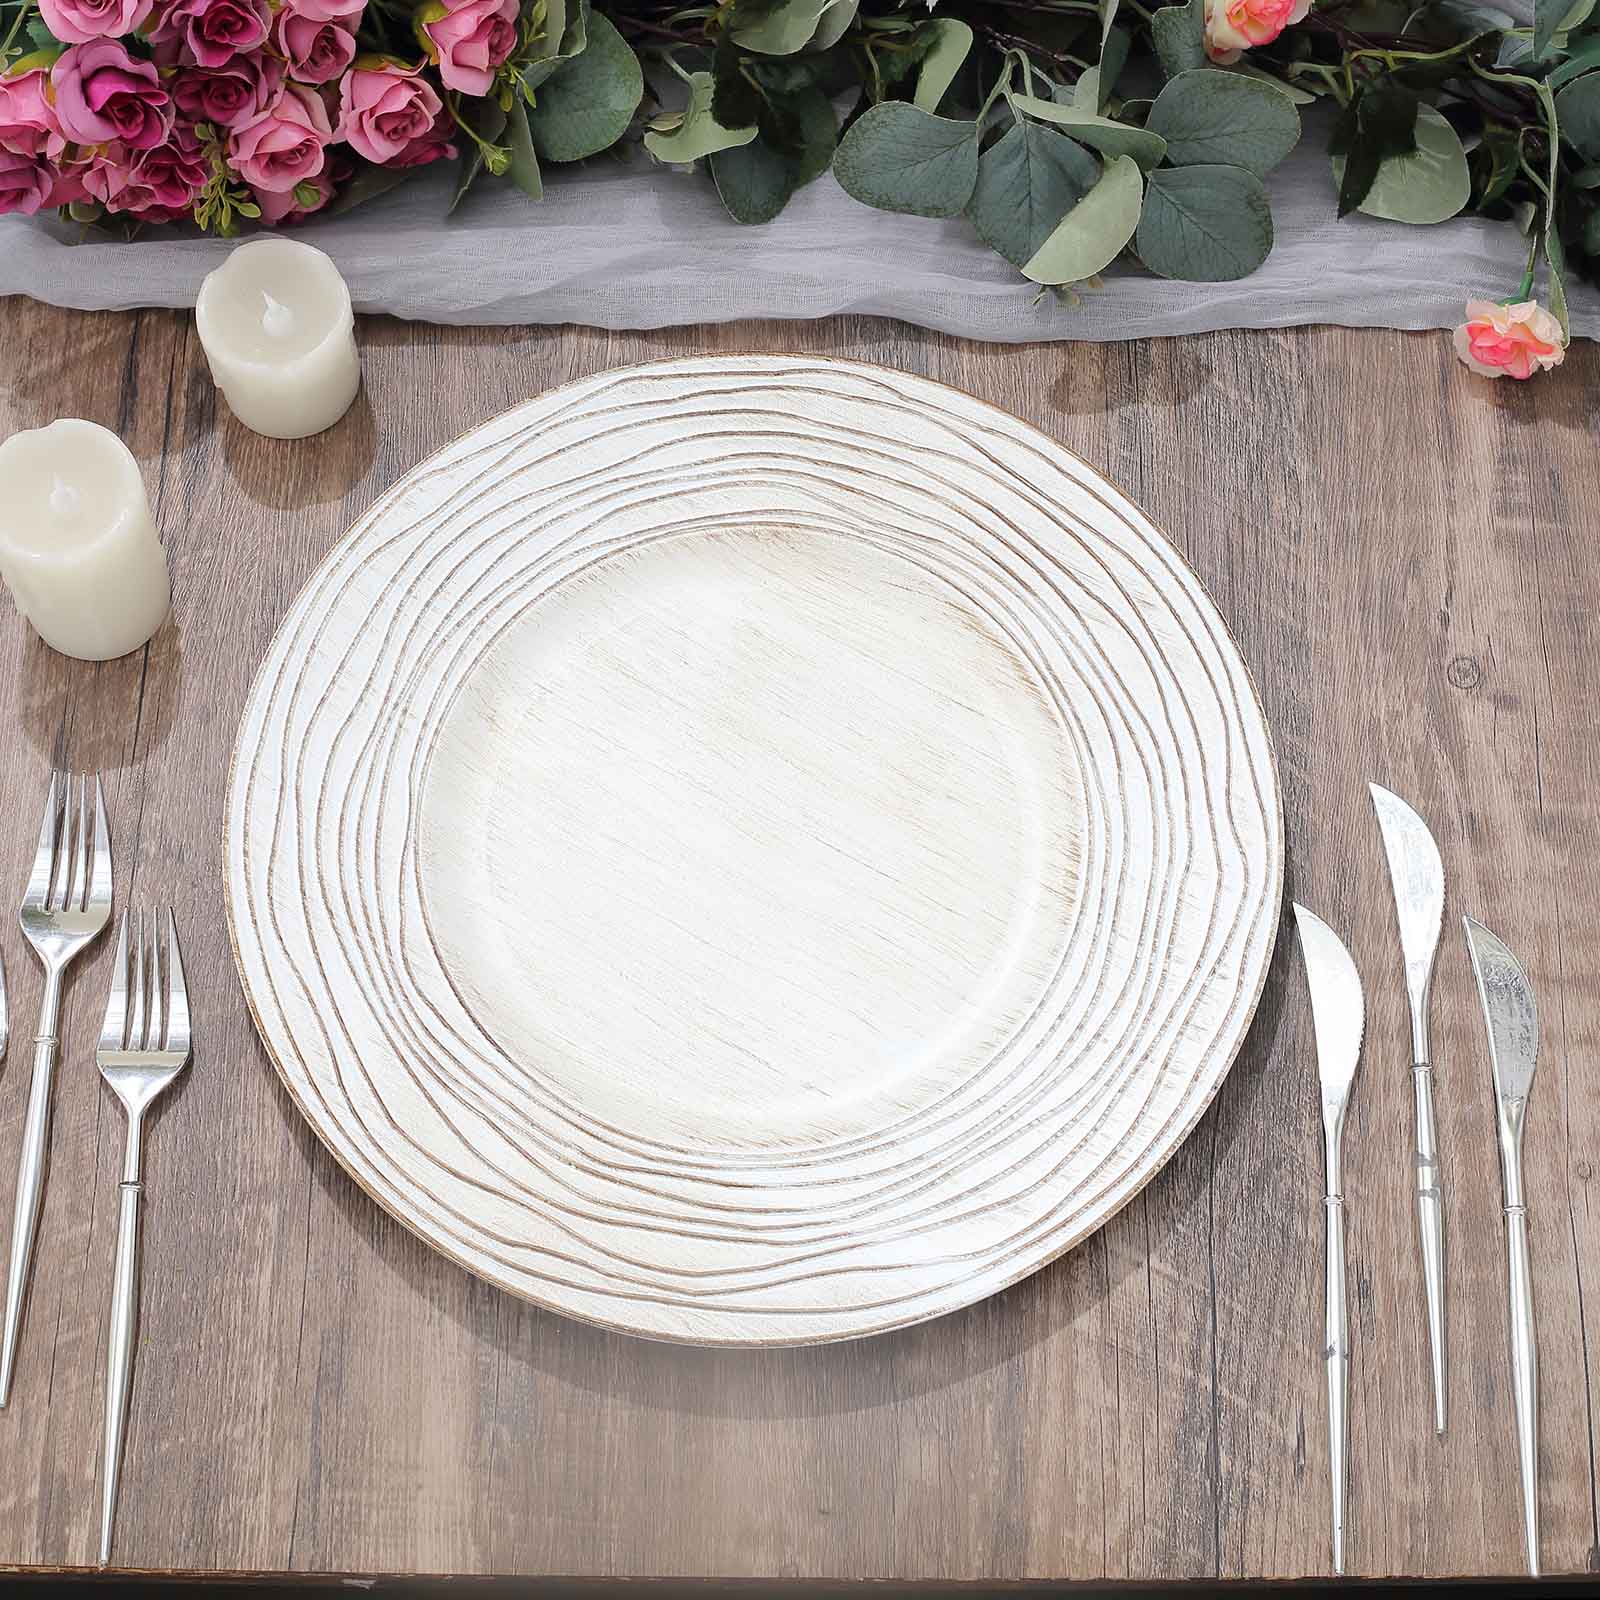 6 White Washed 13 in Rustic Wooden Round Plastic Charger Plates with Rose Embossed Trim